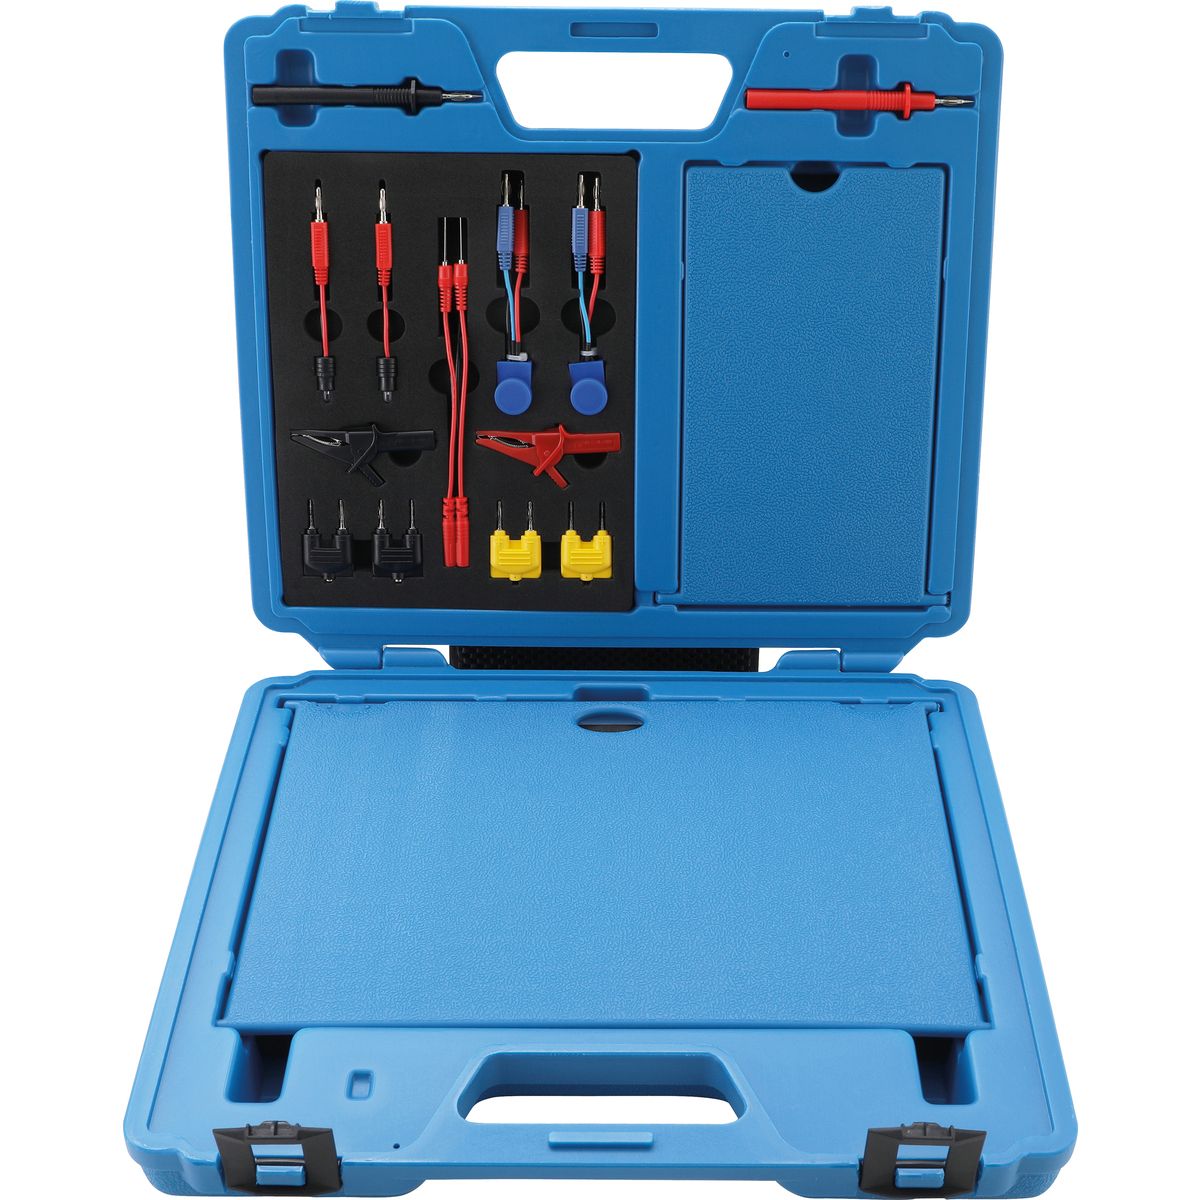 Measuring Cable and Probe Set | 92 pcs.